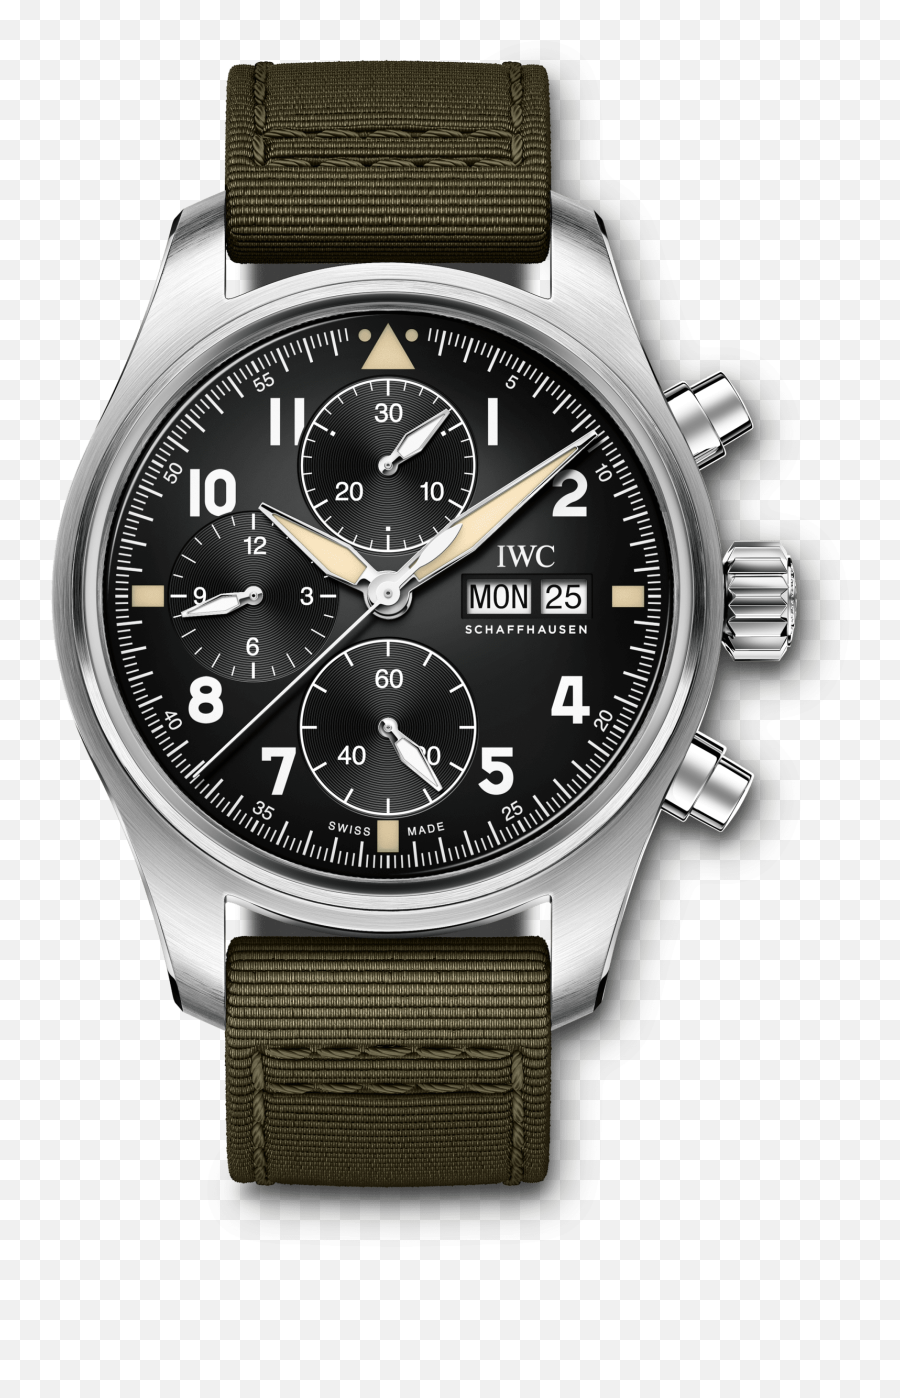 Iw387901 - Pilotu0027s Watch Chronograph Spitfire Iwc Spitfire Chronograph Png,Icon Hooligan 2 Etched Motorcycle Jacket